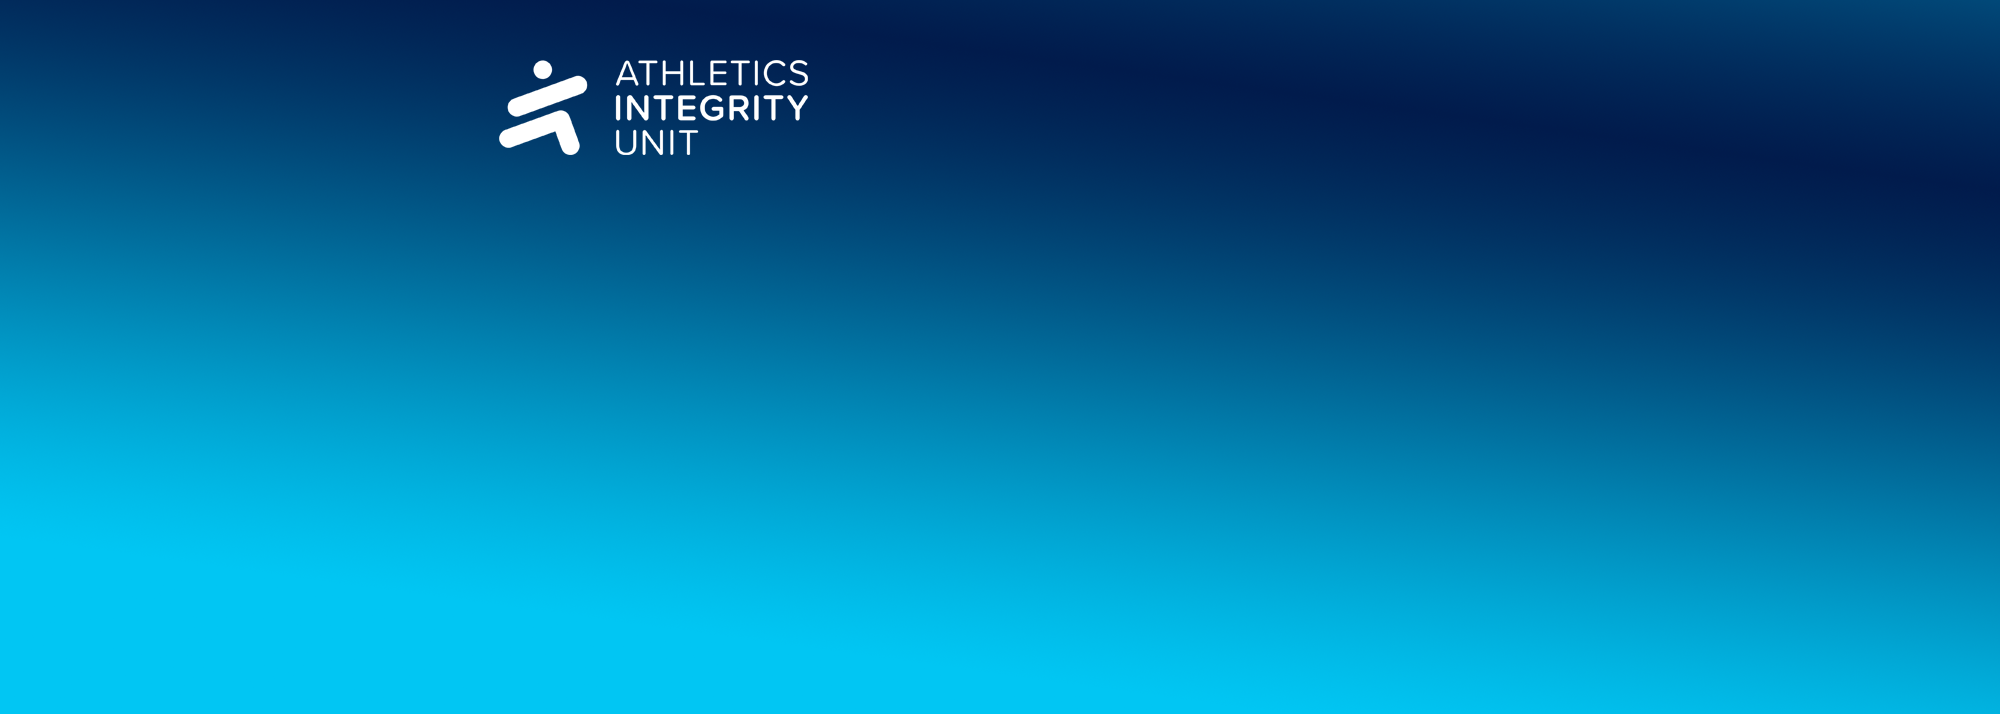 The Athletics Integrity Unit (AIU) is looking for a Database Specialist Coordinator